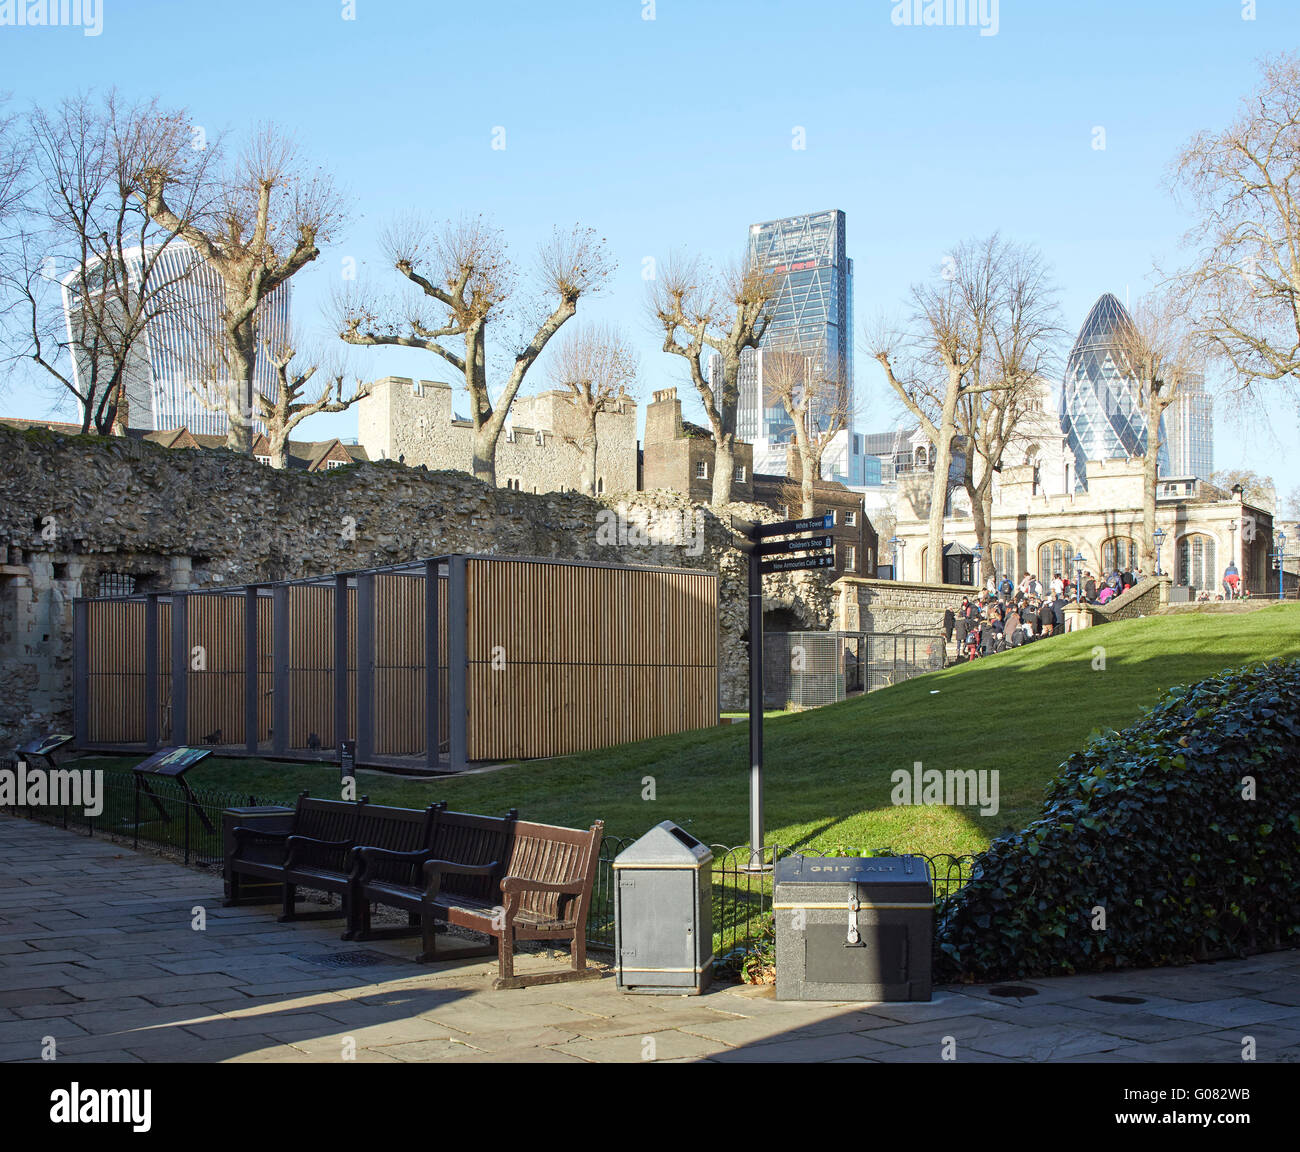 Raven enclosure from approach. Ravens Night Enclosures at Tower of London, London, United Kingdom. Architect: llowarch and llowarch architects, 2015. Stock Photo